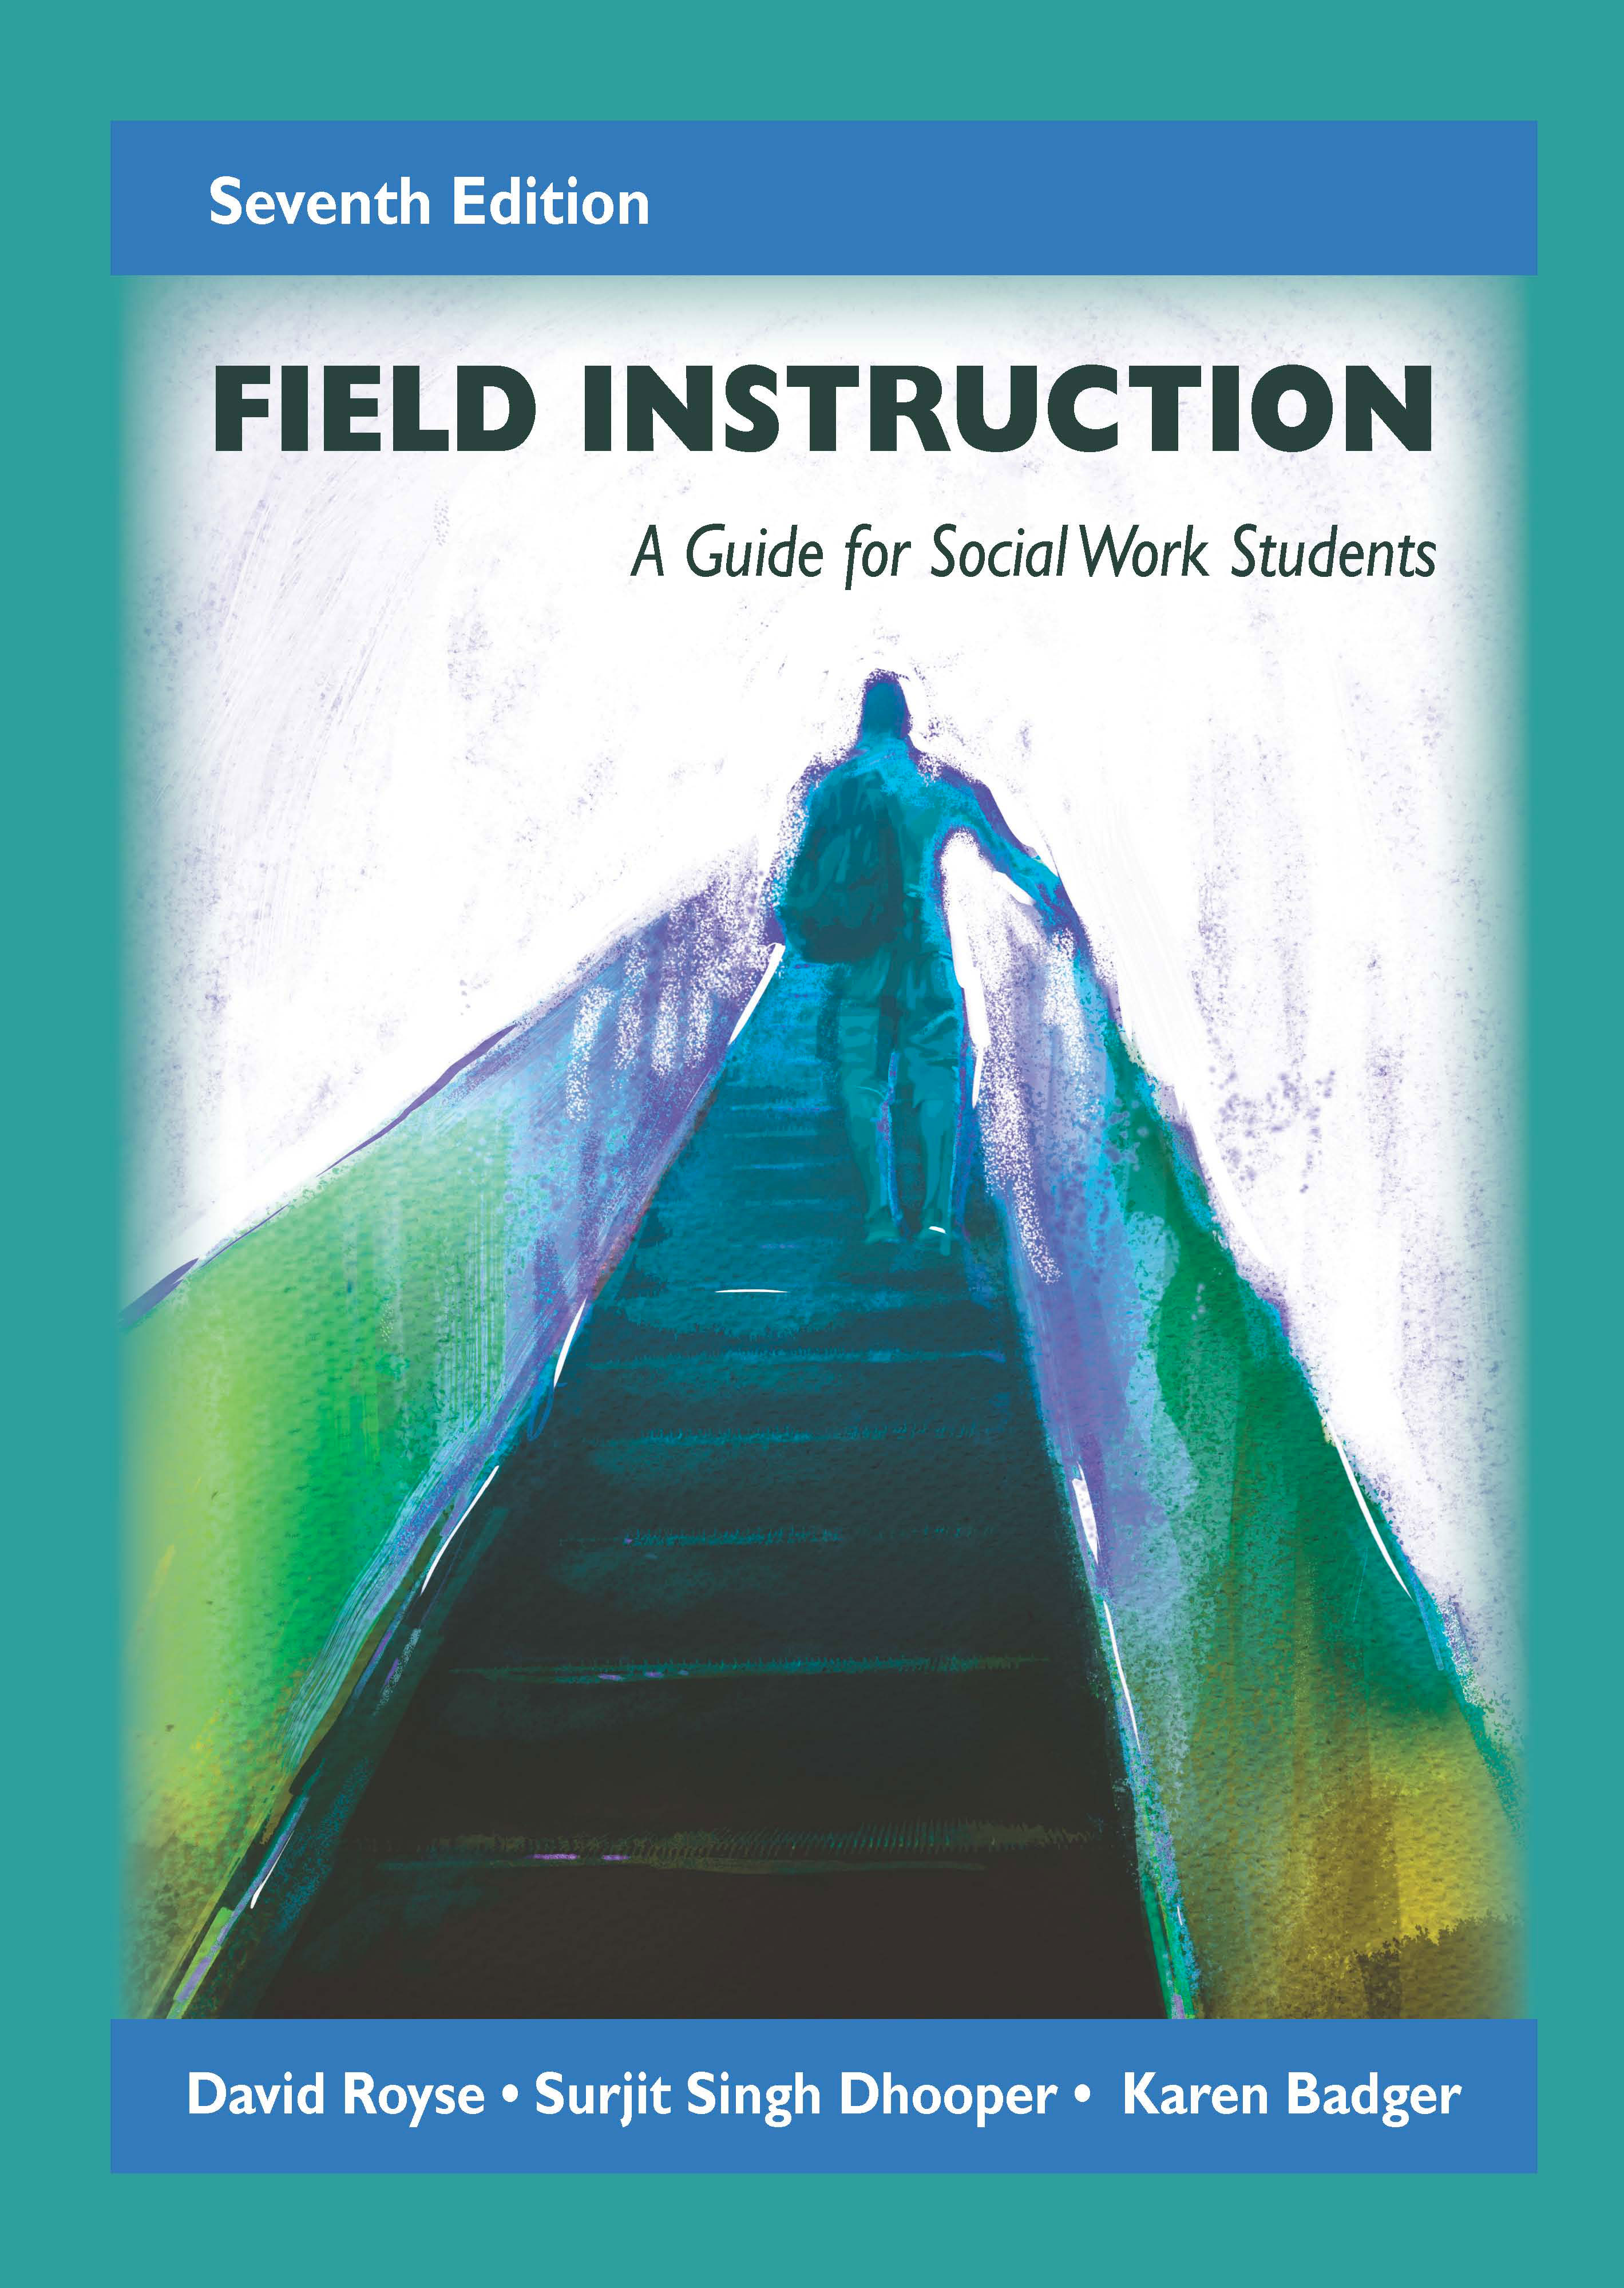 Field Instruction: A Guide for Social Work Students, Seventh Edition by David  Royse, Surjit Singh Dhooper, Karen  Badger